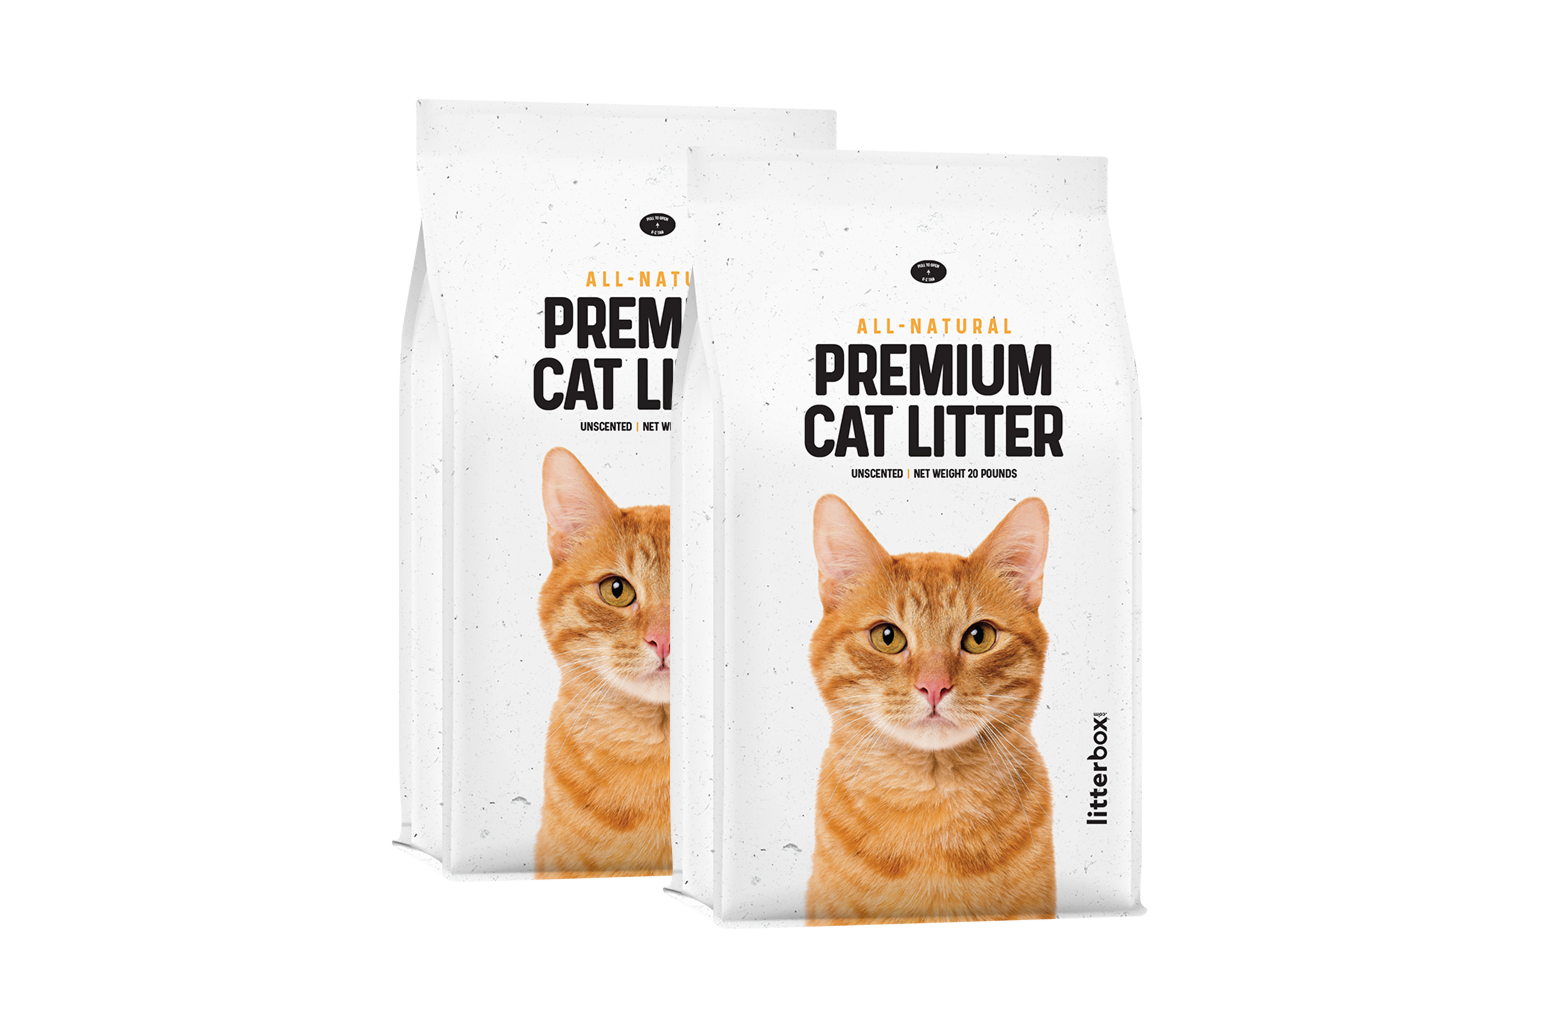 Two 20 pound bags of premium cat litter